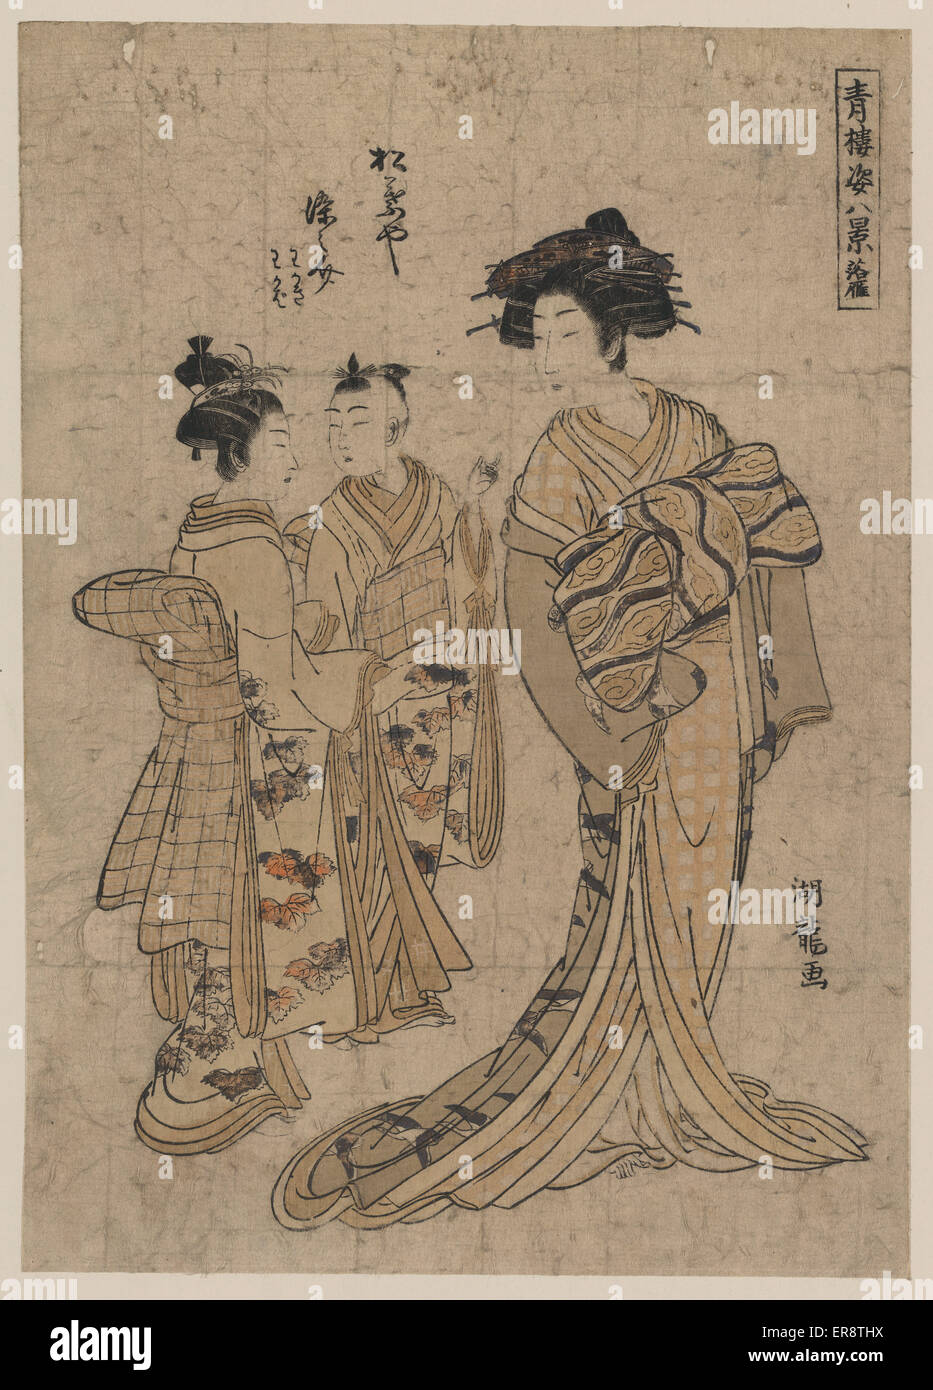 Descending geese: the courtesan Somenosuke of Matsuba-ya. Print shows Somenosuke, a courtesan, full-length portrait, standing, facing left, with two attendants/trainees. Date 1775 or 1776. Stock Photo